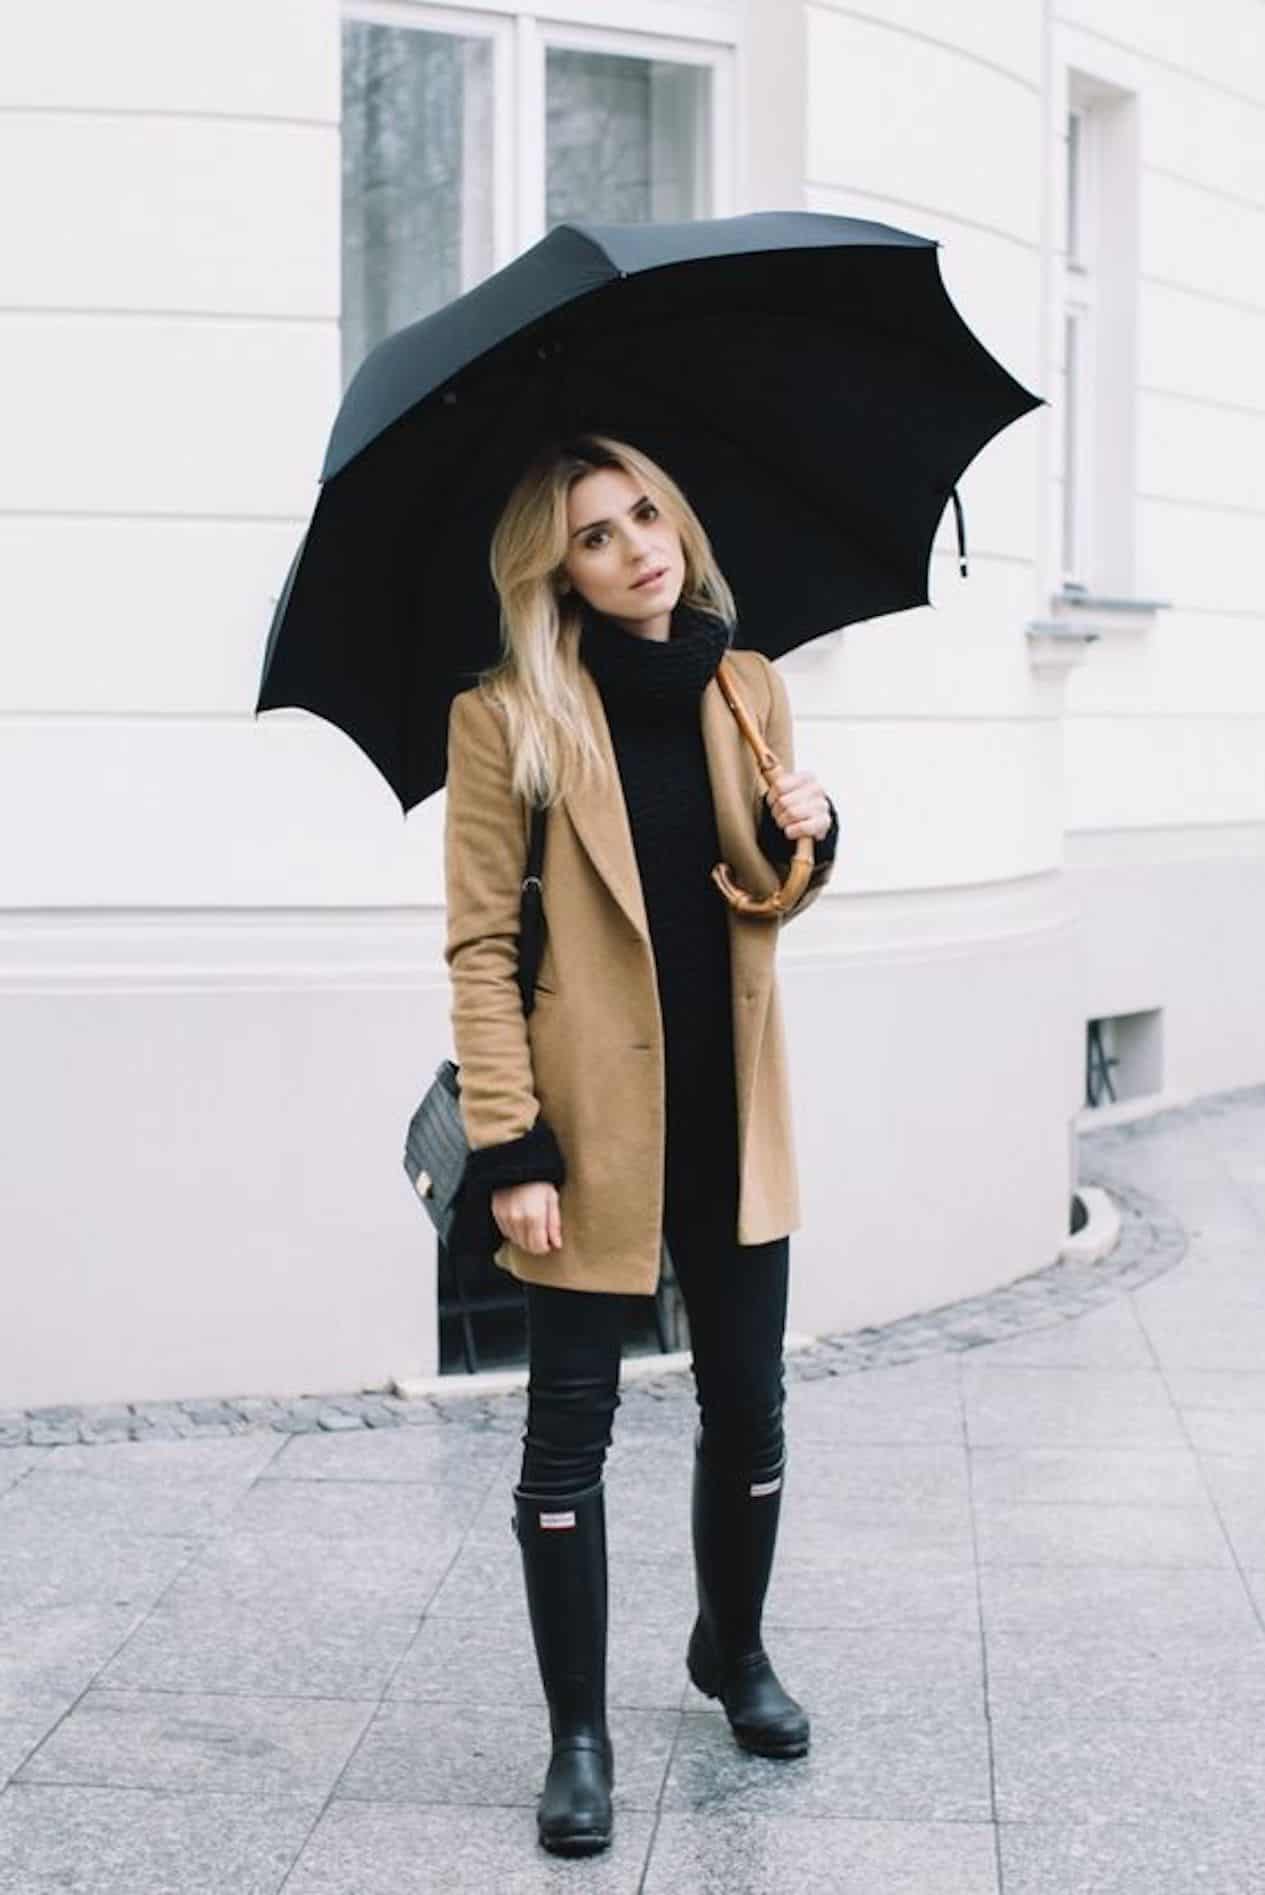 image of a woman standing on a sidewalk wearing a camel coat, black pants, rain boots, and holding an umbrella